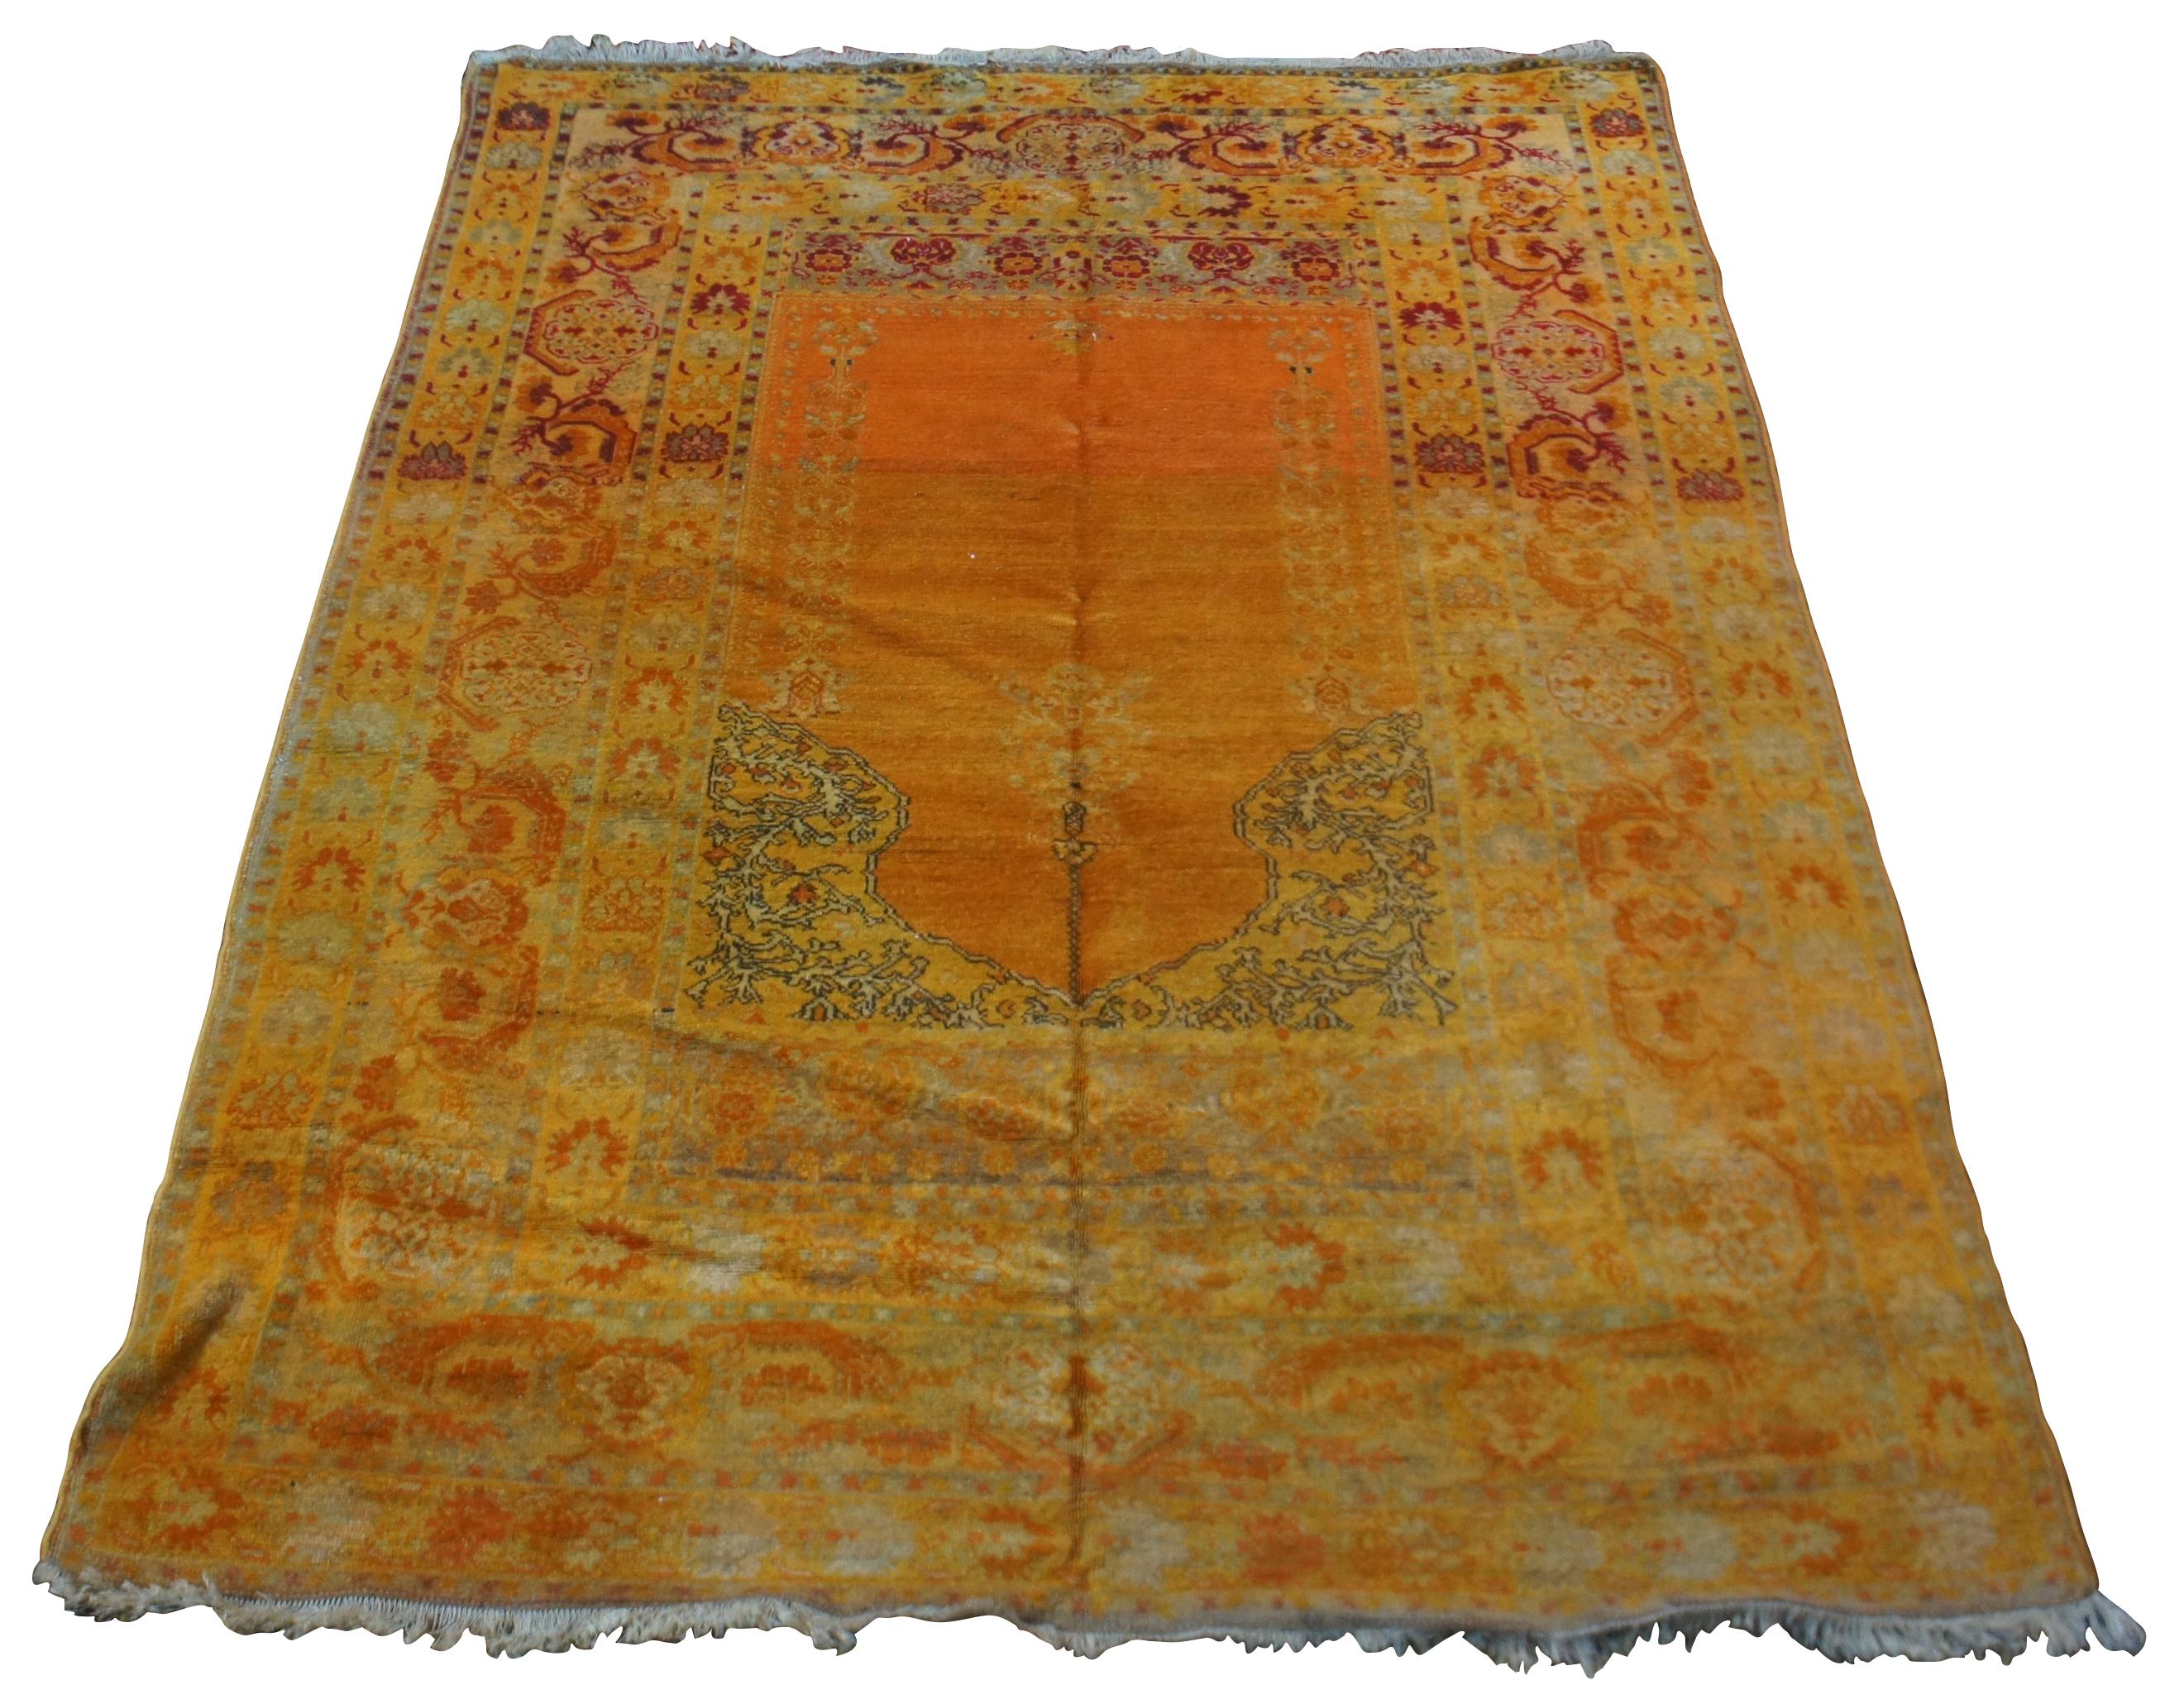 Antique Turkish wool prayer rug in shades of orange, yellow, and red.

Measures 69” x 51” / 5.75’ x 4.25’ (length x width).